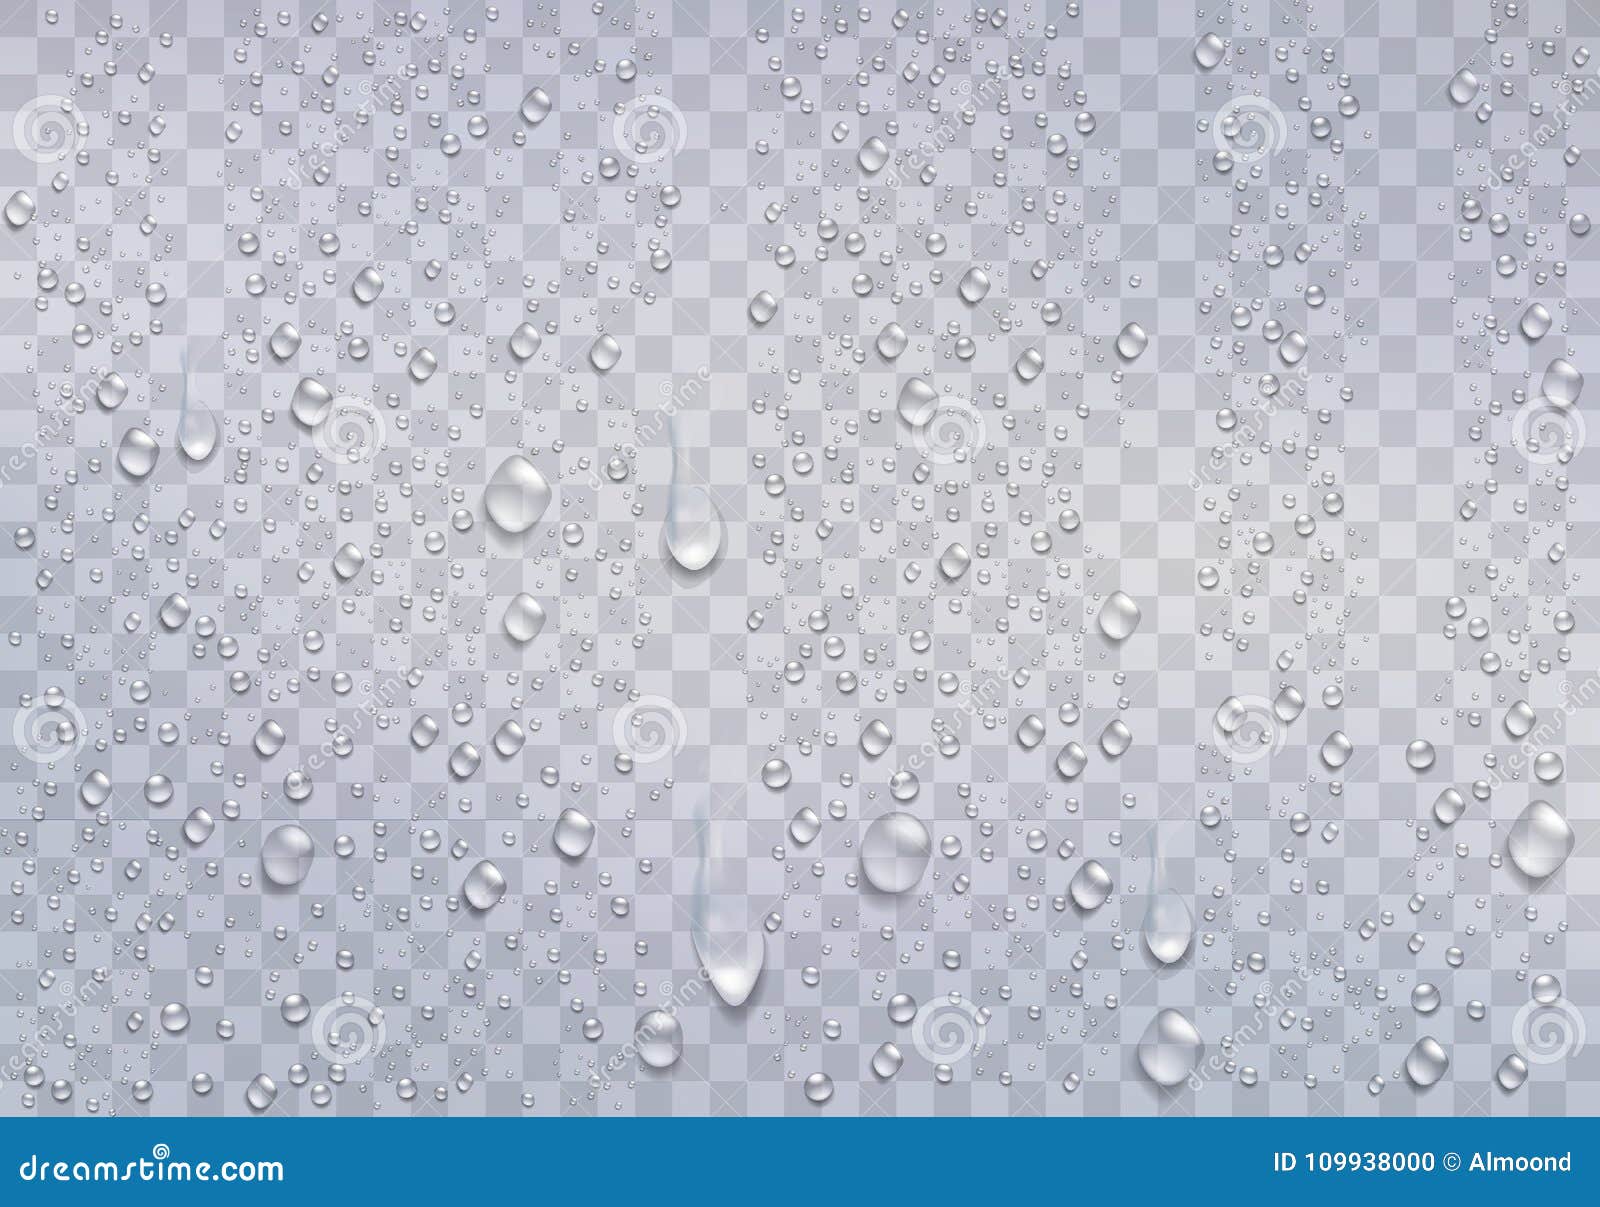 realistic water droplets on the transparent window.